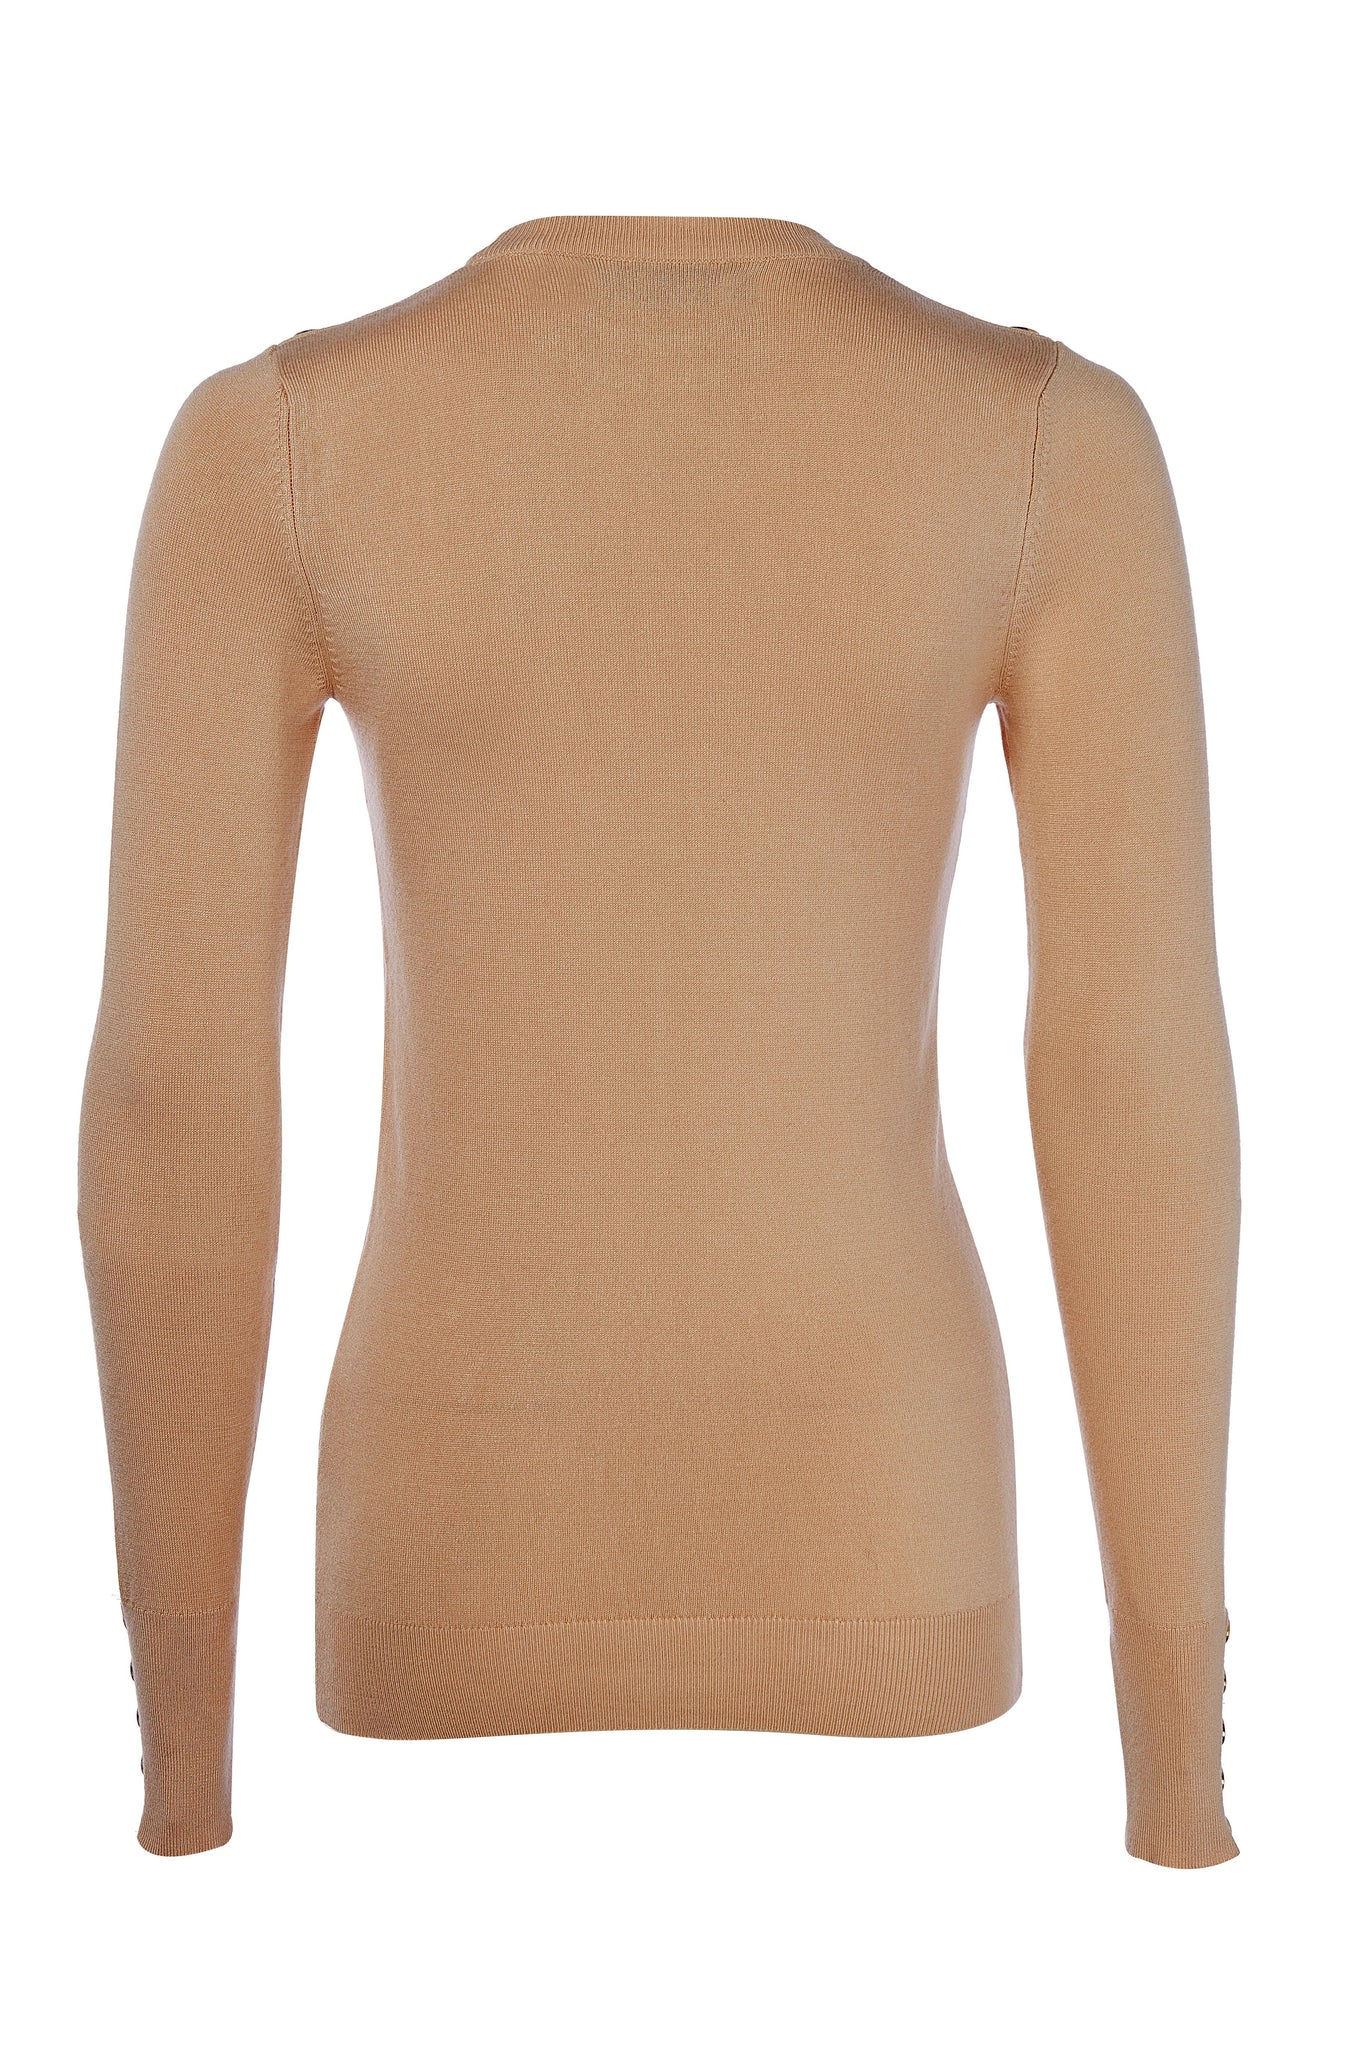 back of super soft lightweight jumper in dark camel with ribbed crew neck collar, cuffs and hem and gold button detail across shoulders and cuffs